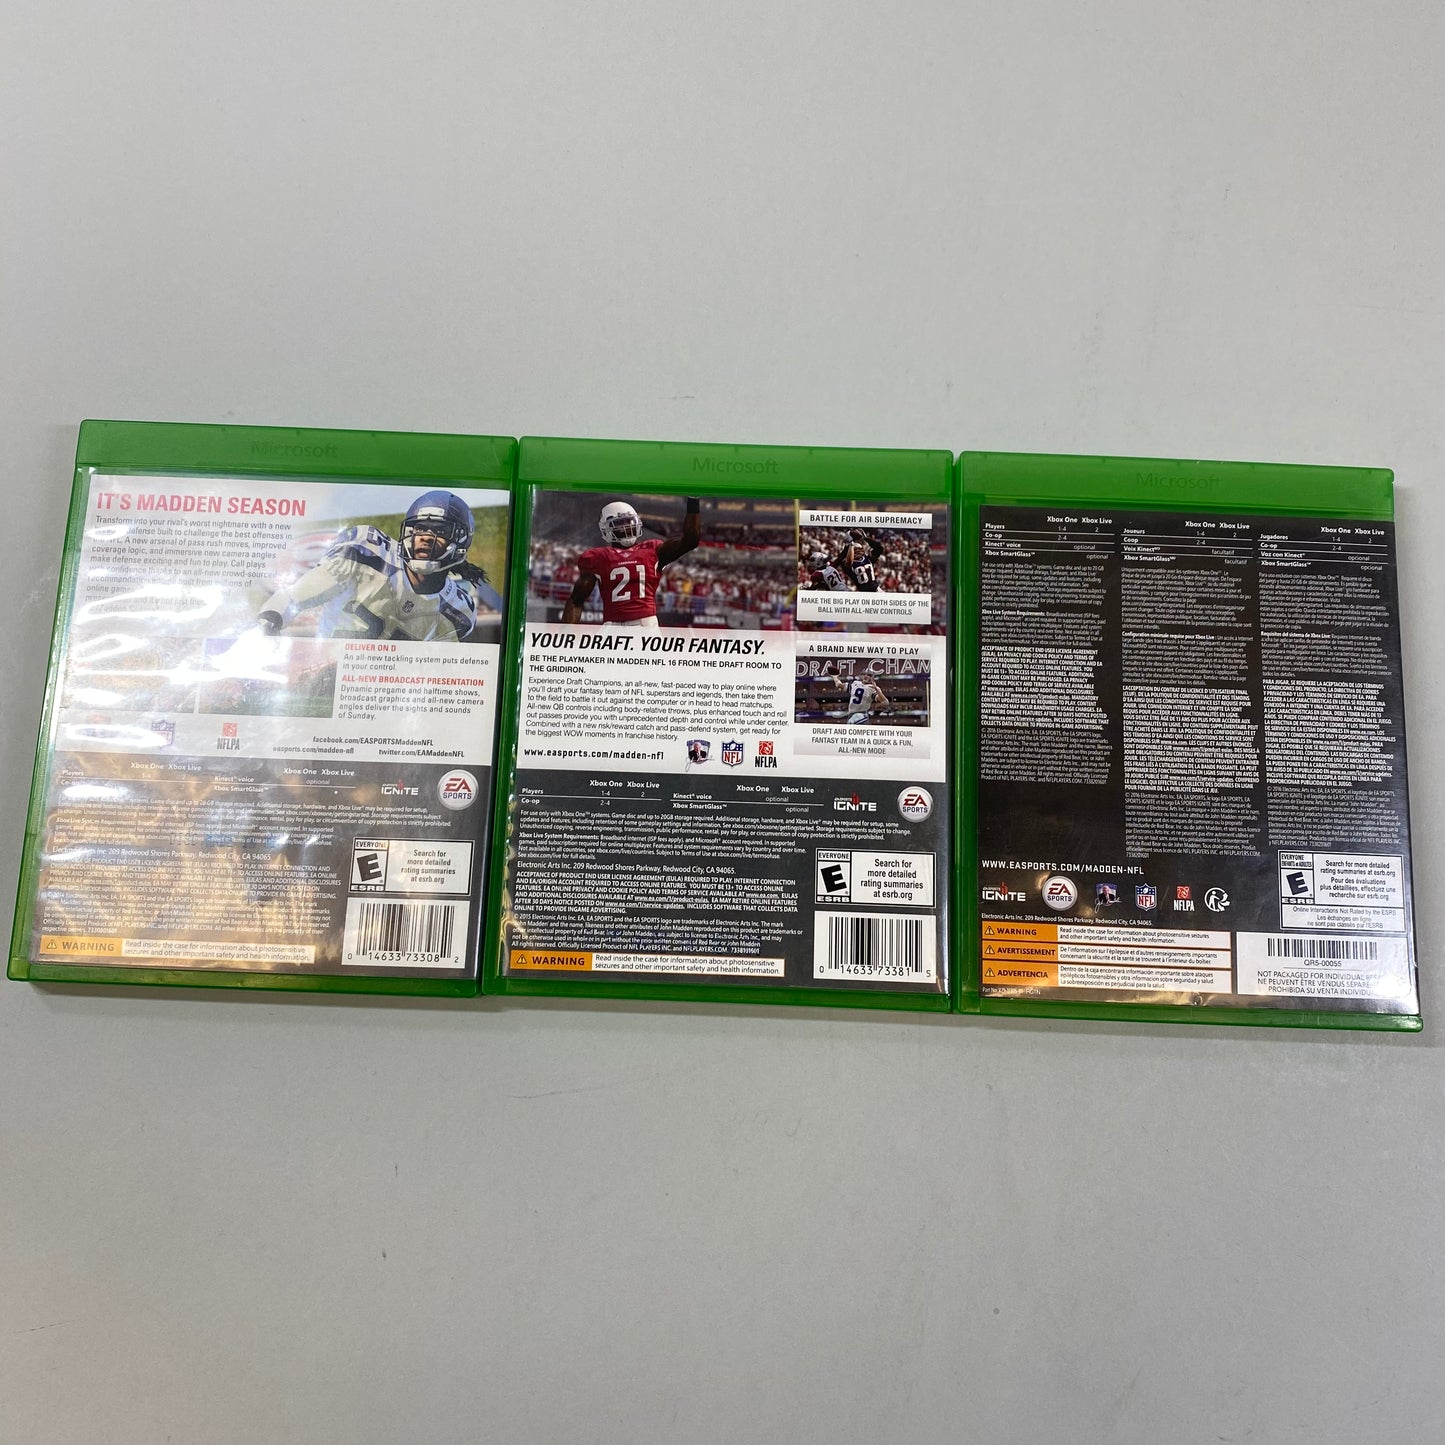 Lot of 3 Microsoft Xbox One Madden 15 16 and 17